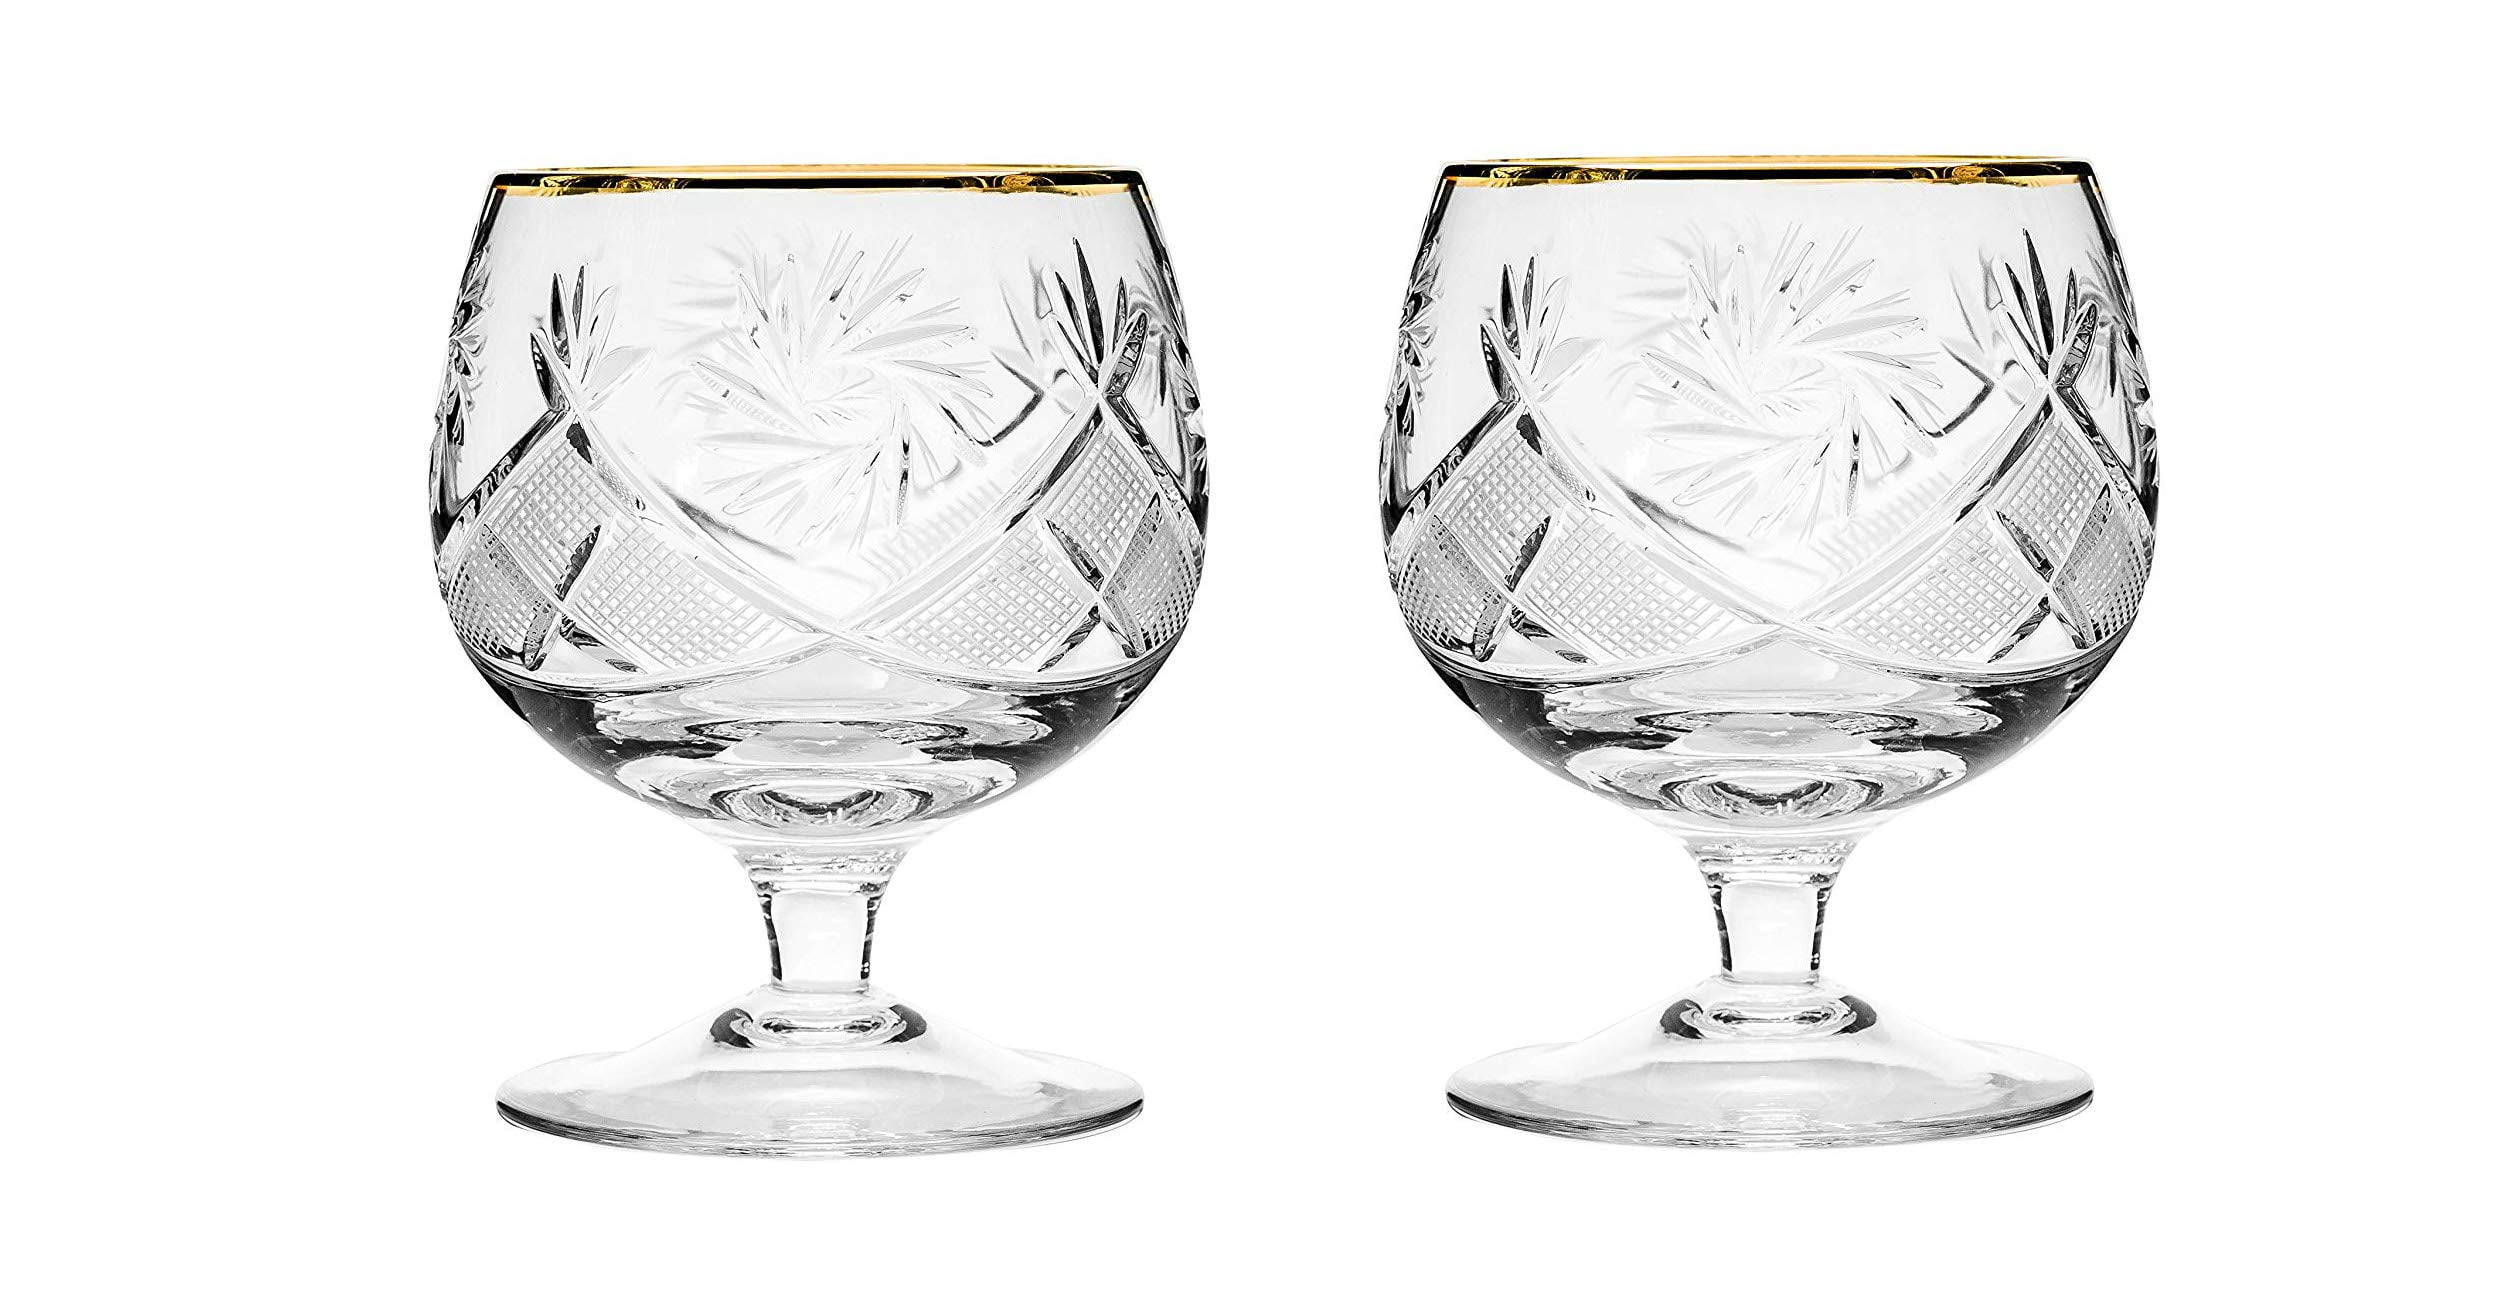 Set of 2 Cut Crystal Brandy Snifter Glasses - 11oz Old Fashioned